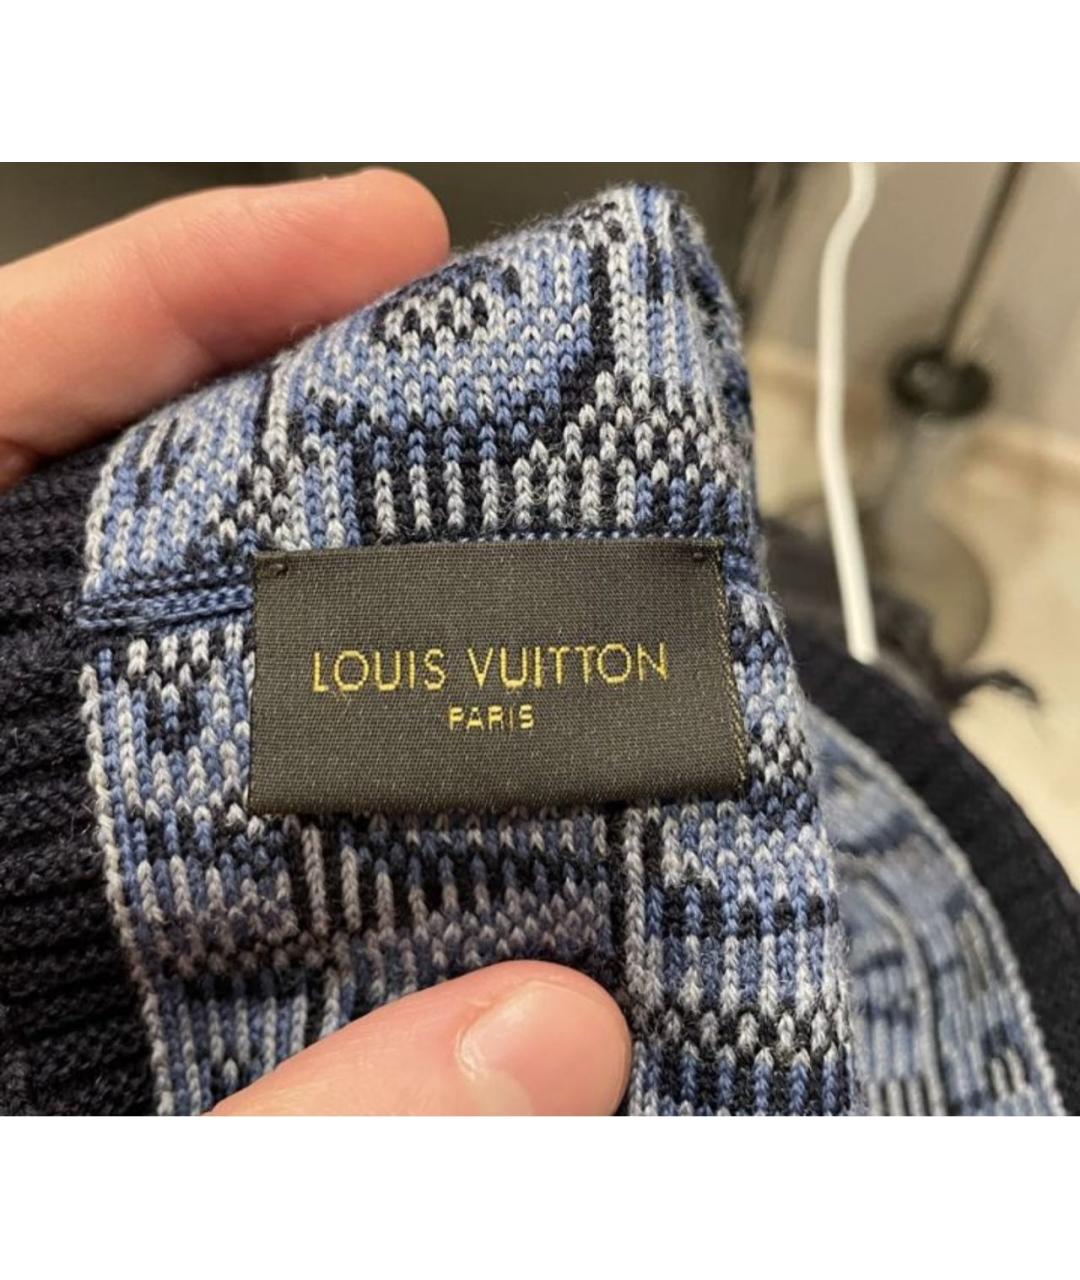 LOUIS VUITTON PRE-OWNED Шерстяная шапка, фото 2